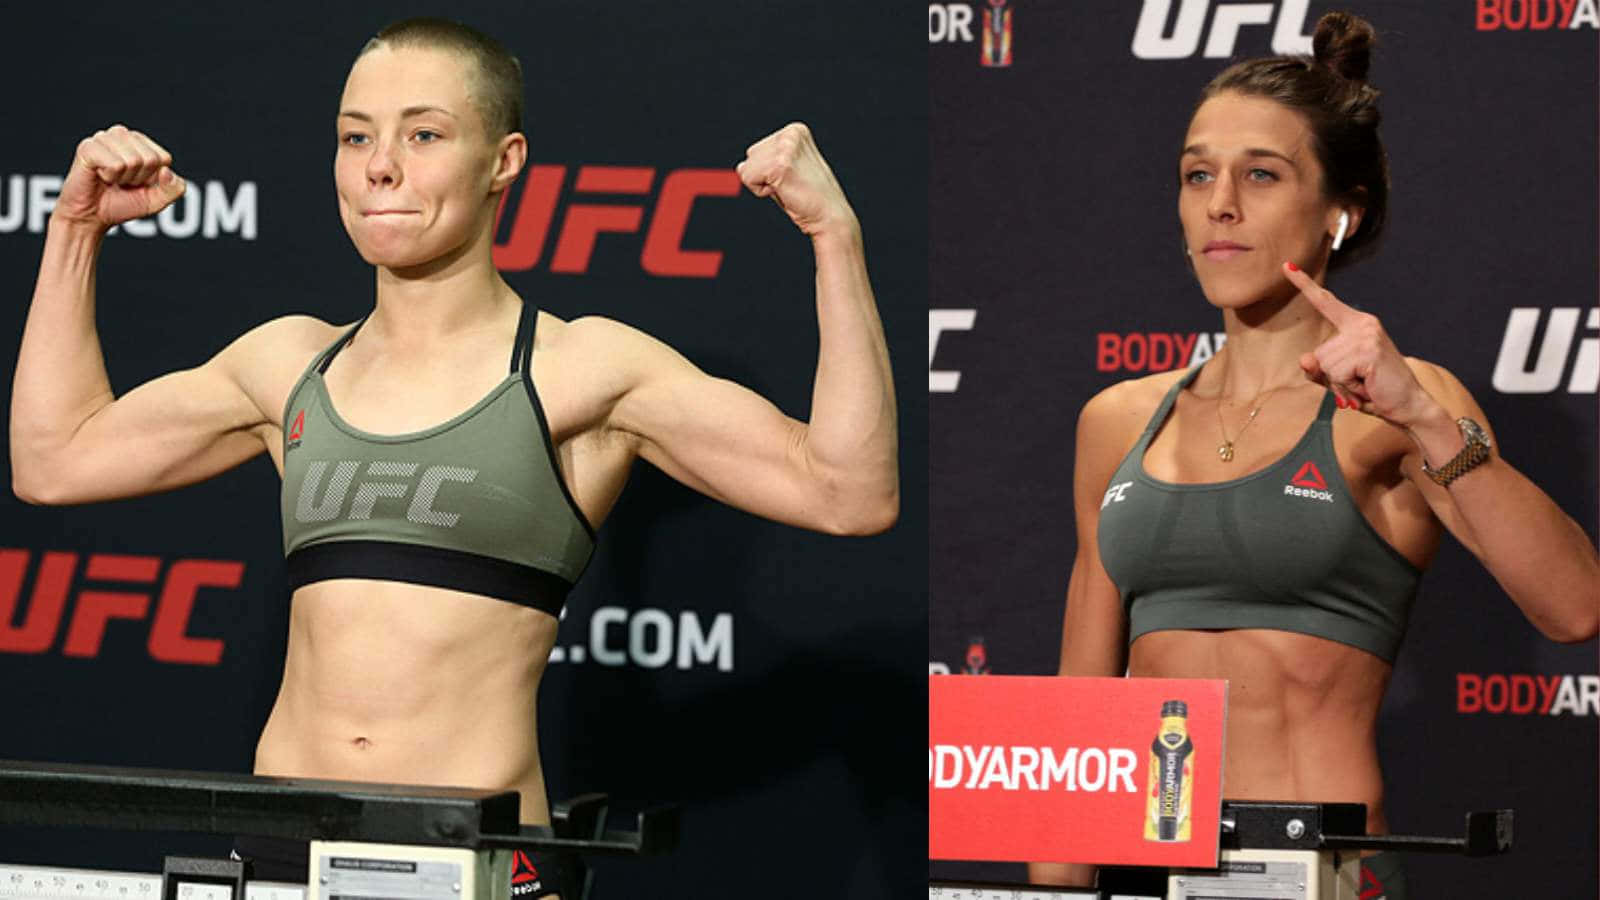 Joanna Jedrzejczyk and Rose Namajunas in intense UFC competition. Wallpaper